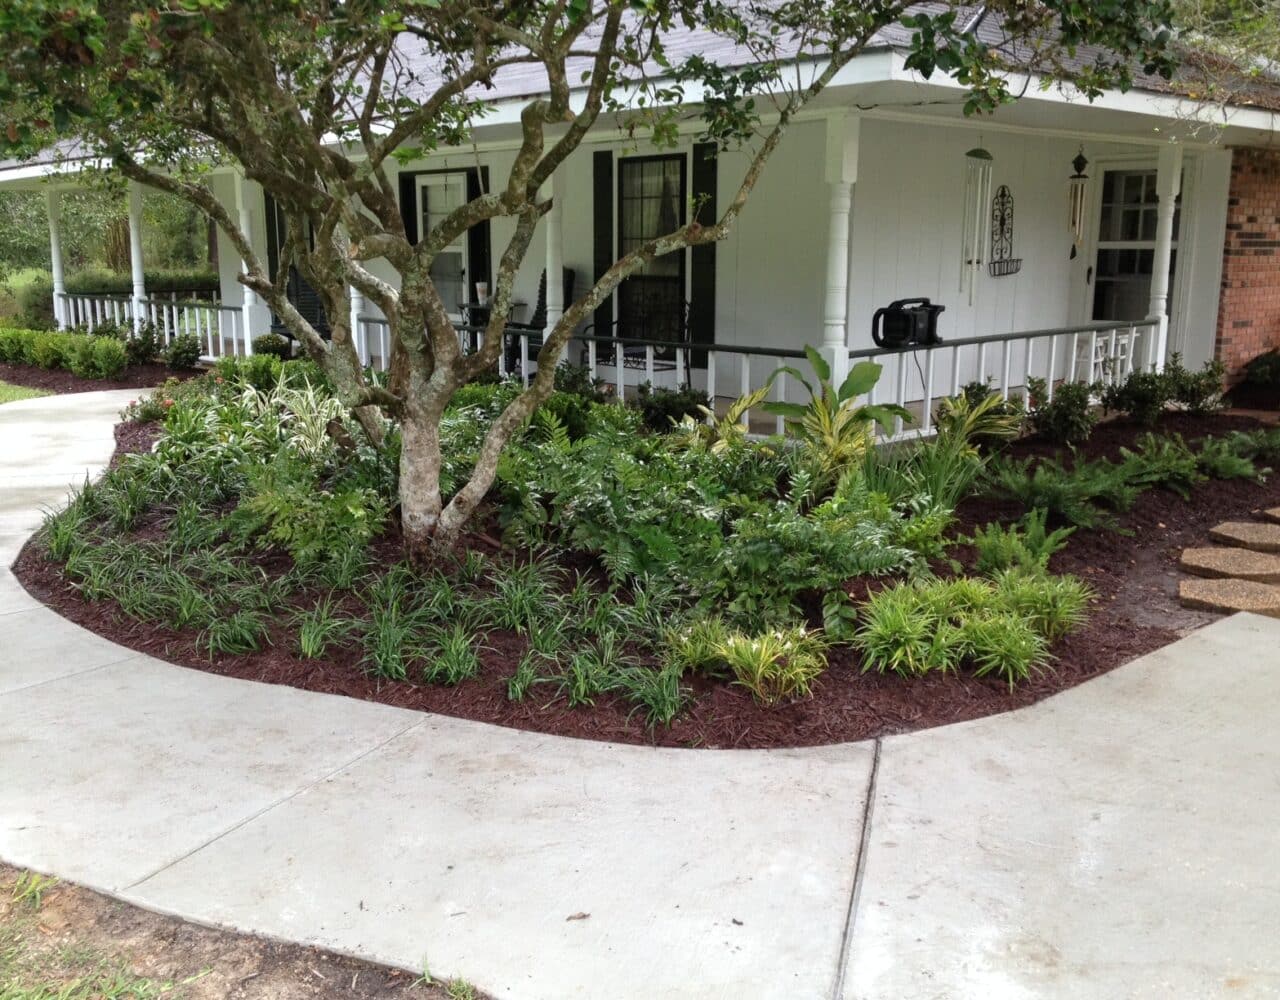 Shady Bed Landscape Design And Architecture - Baton Rouge